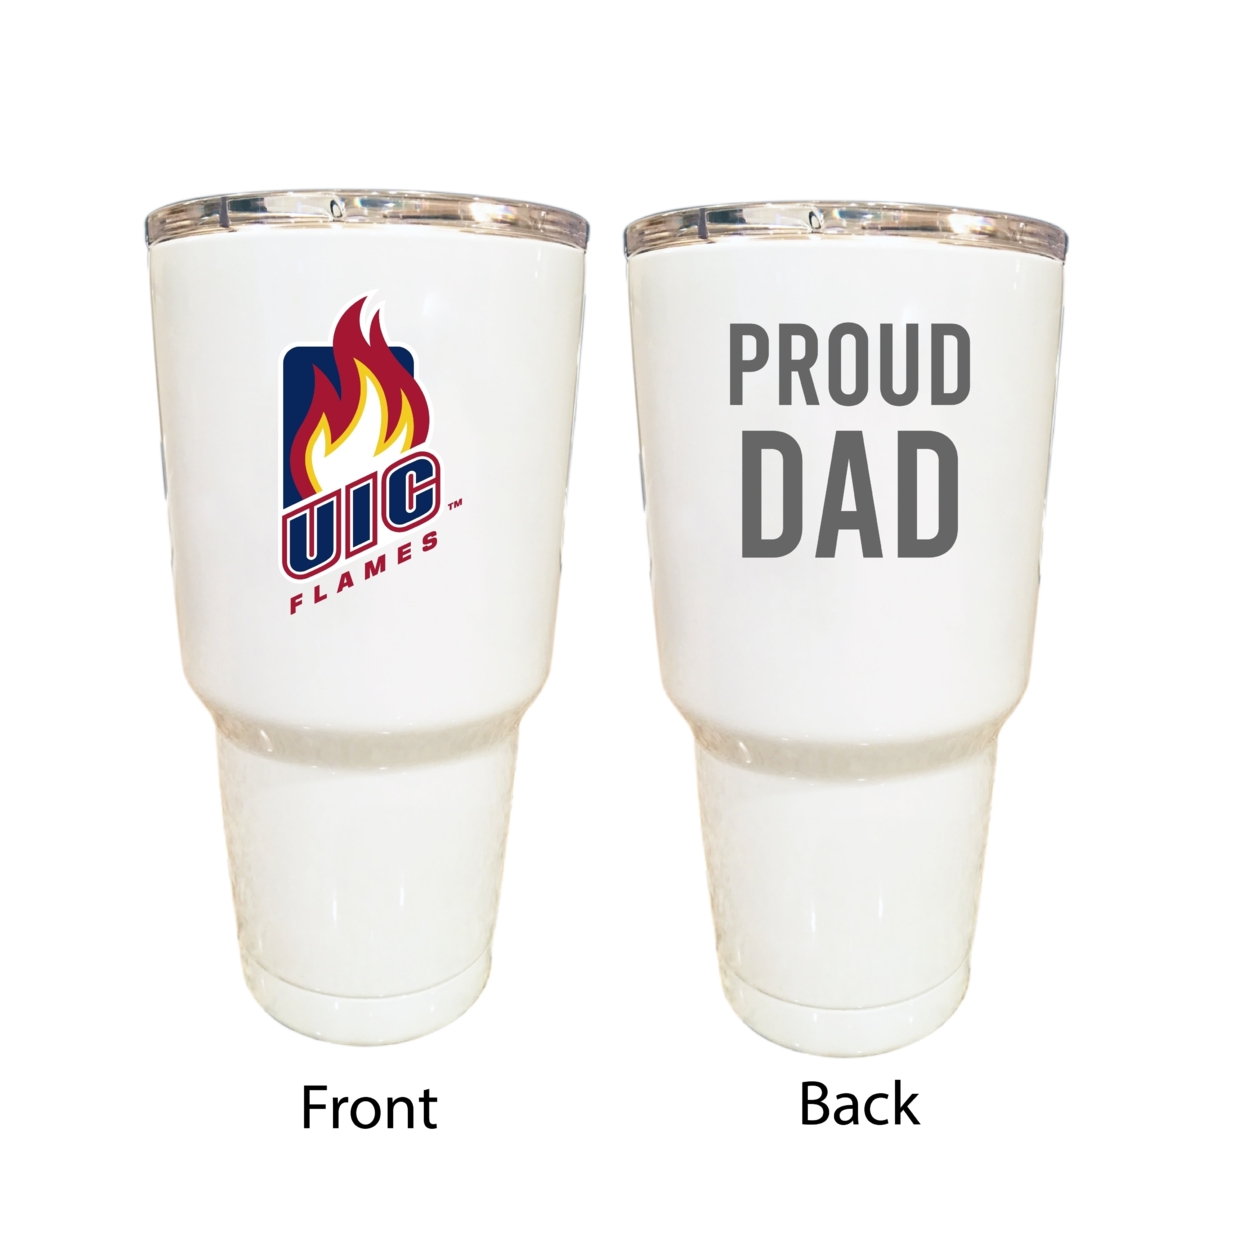 University Of Illinois At Chicago Proud Dad 24 Oz Insulated Stainless Steel Tumblers Choose Your Color. - White